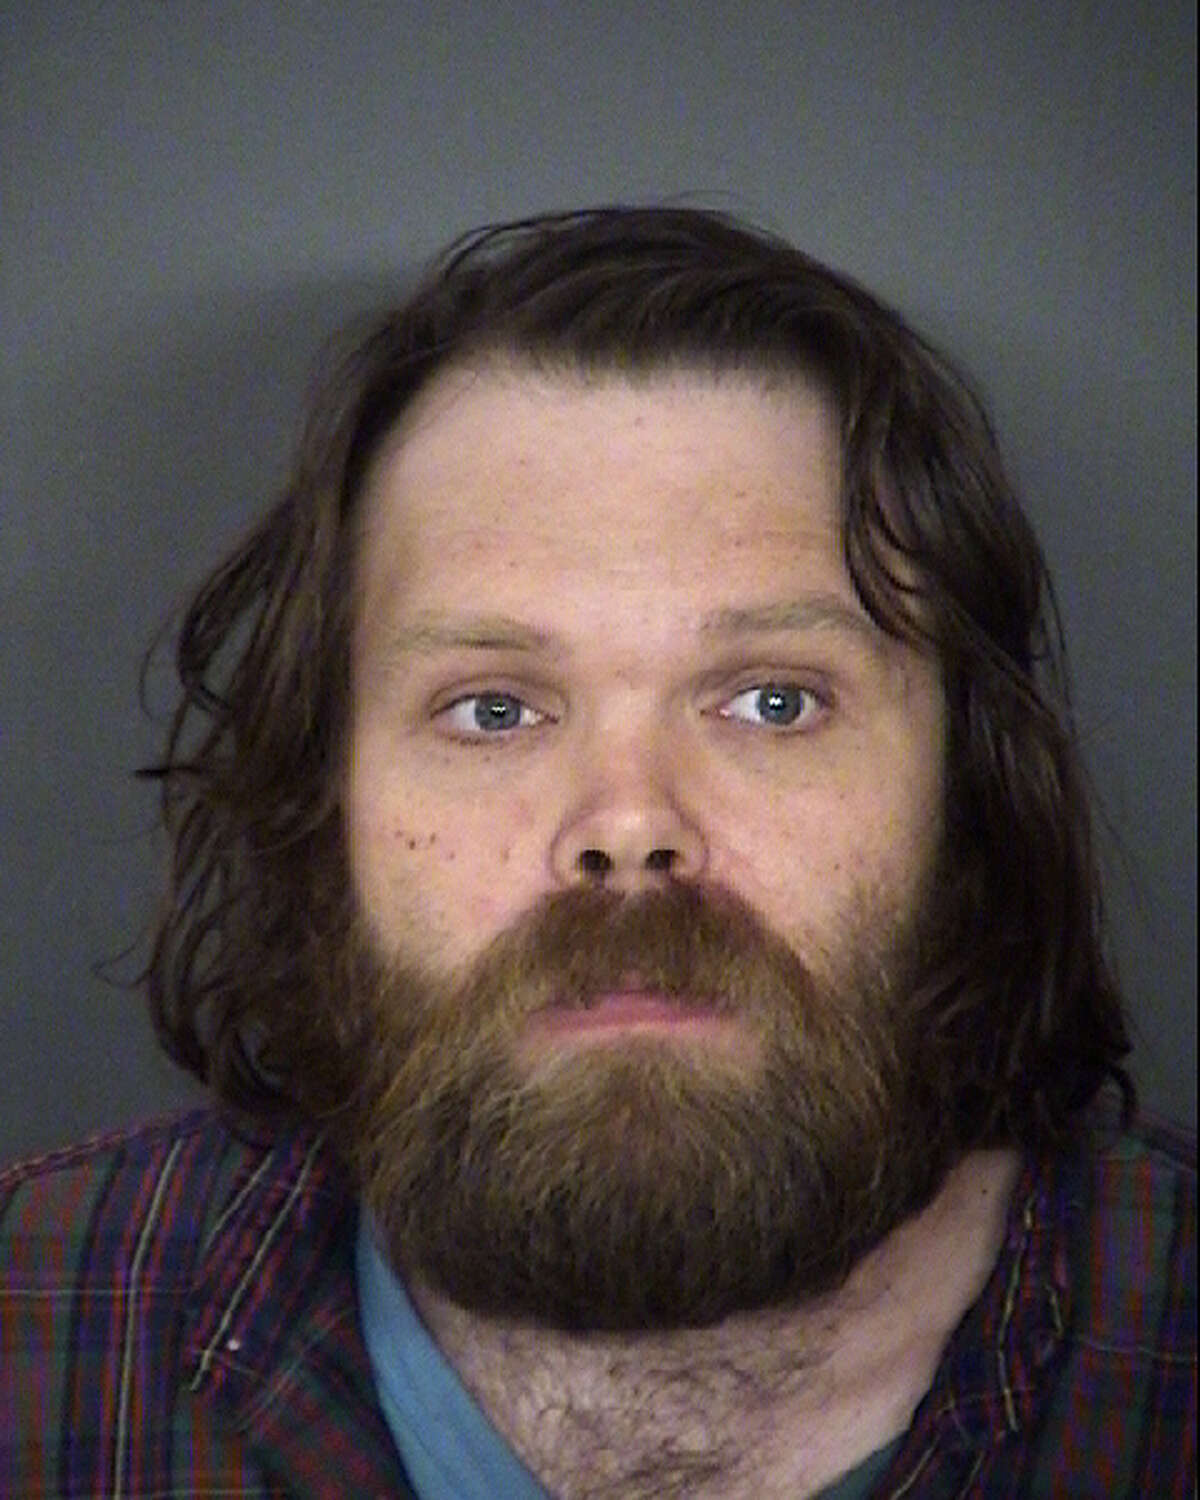 Thomas Nathan Clark, 37, faces a charge of murder. He remains in the Bexar County Jail on a $100,000 bond.